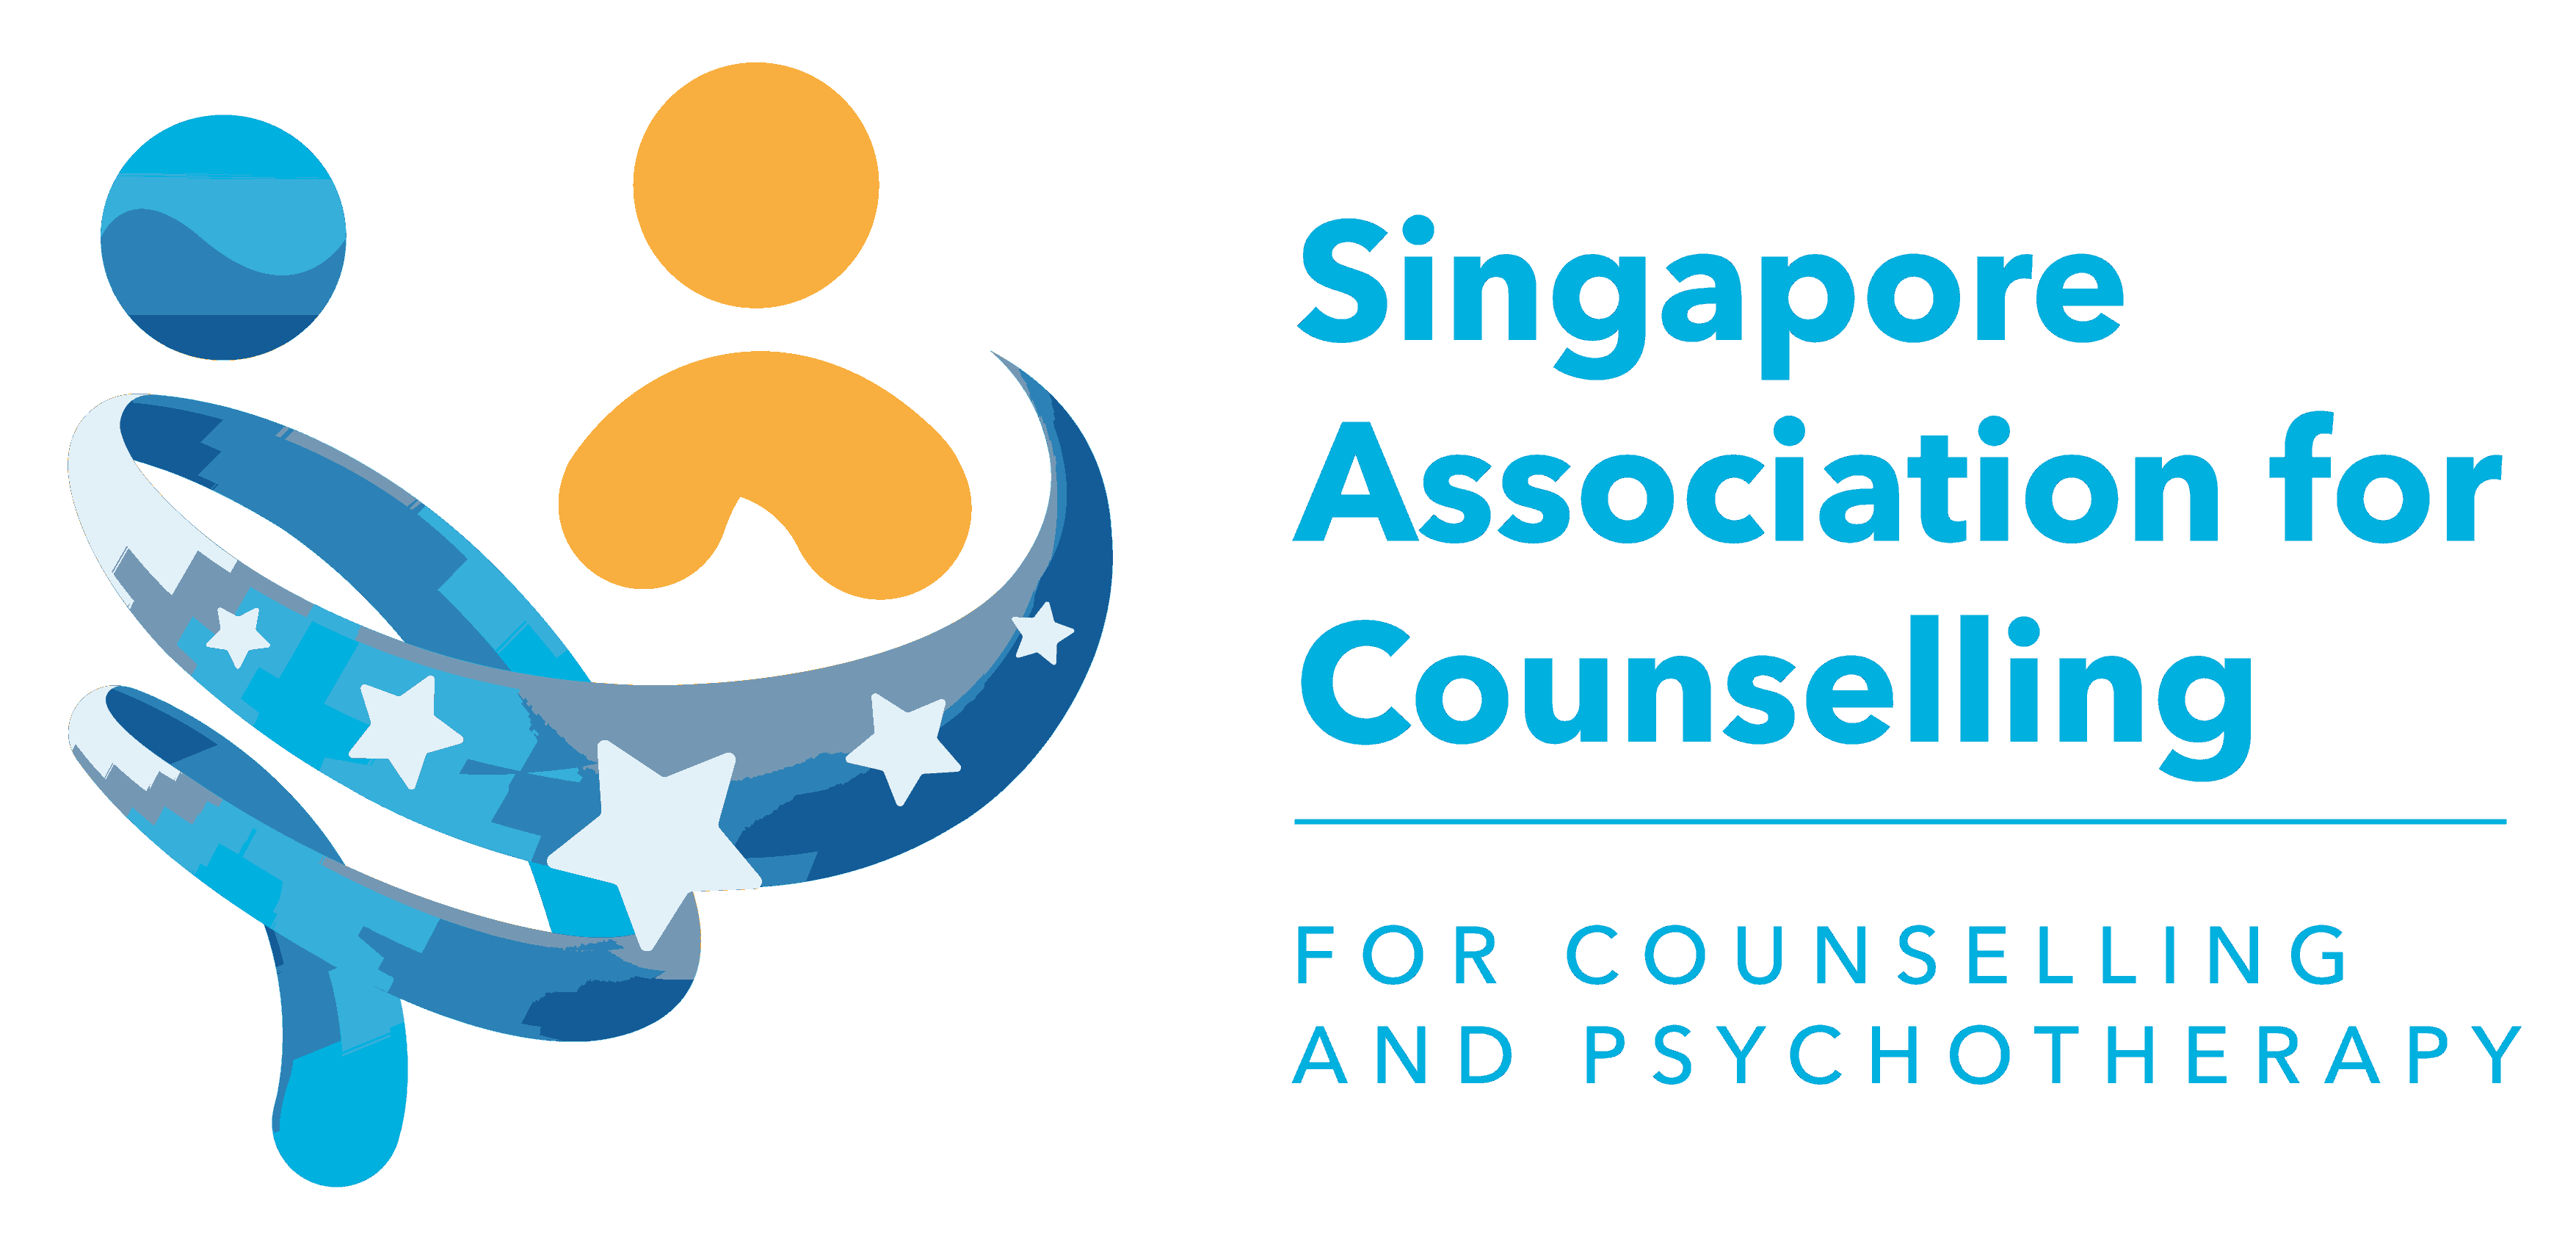 Singapore Association For Counselling logo